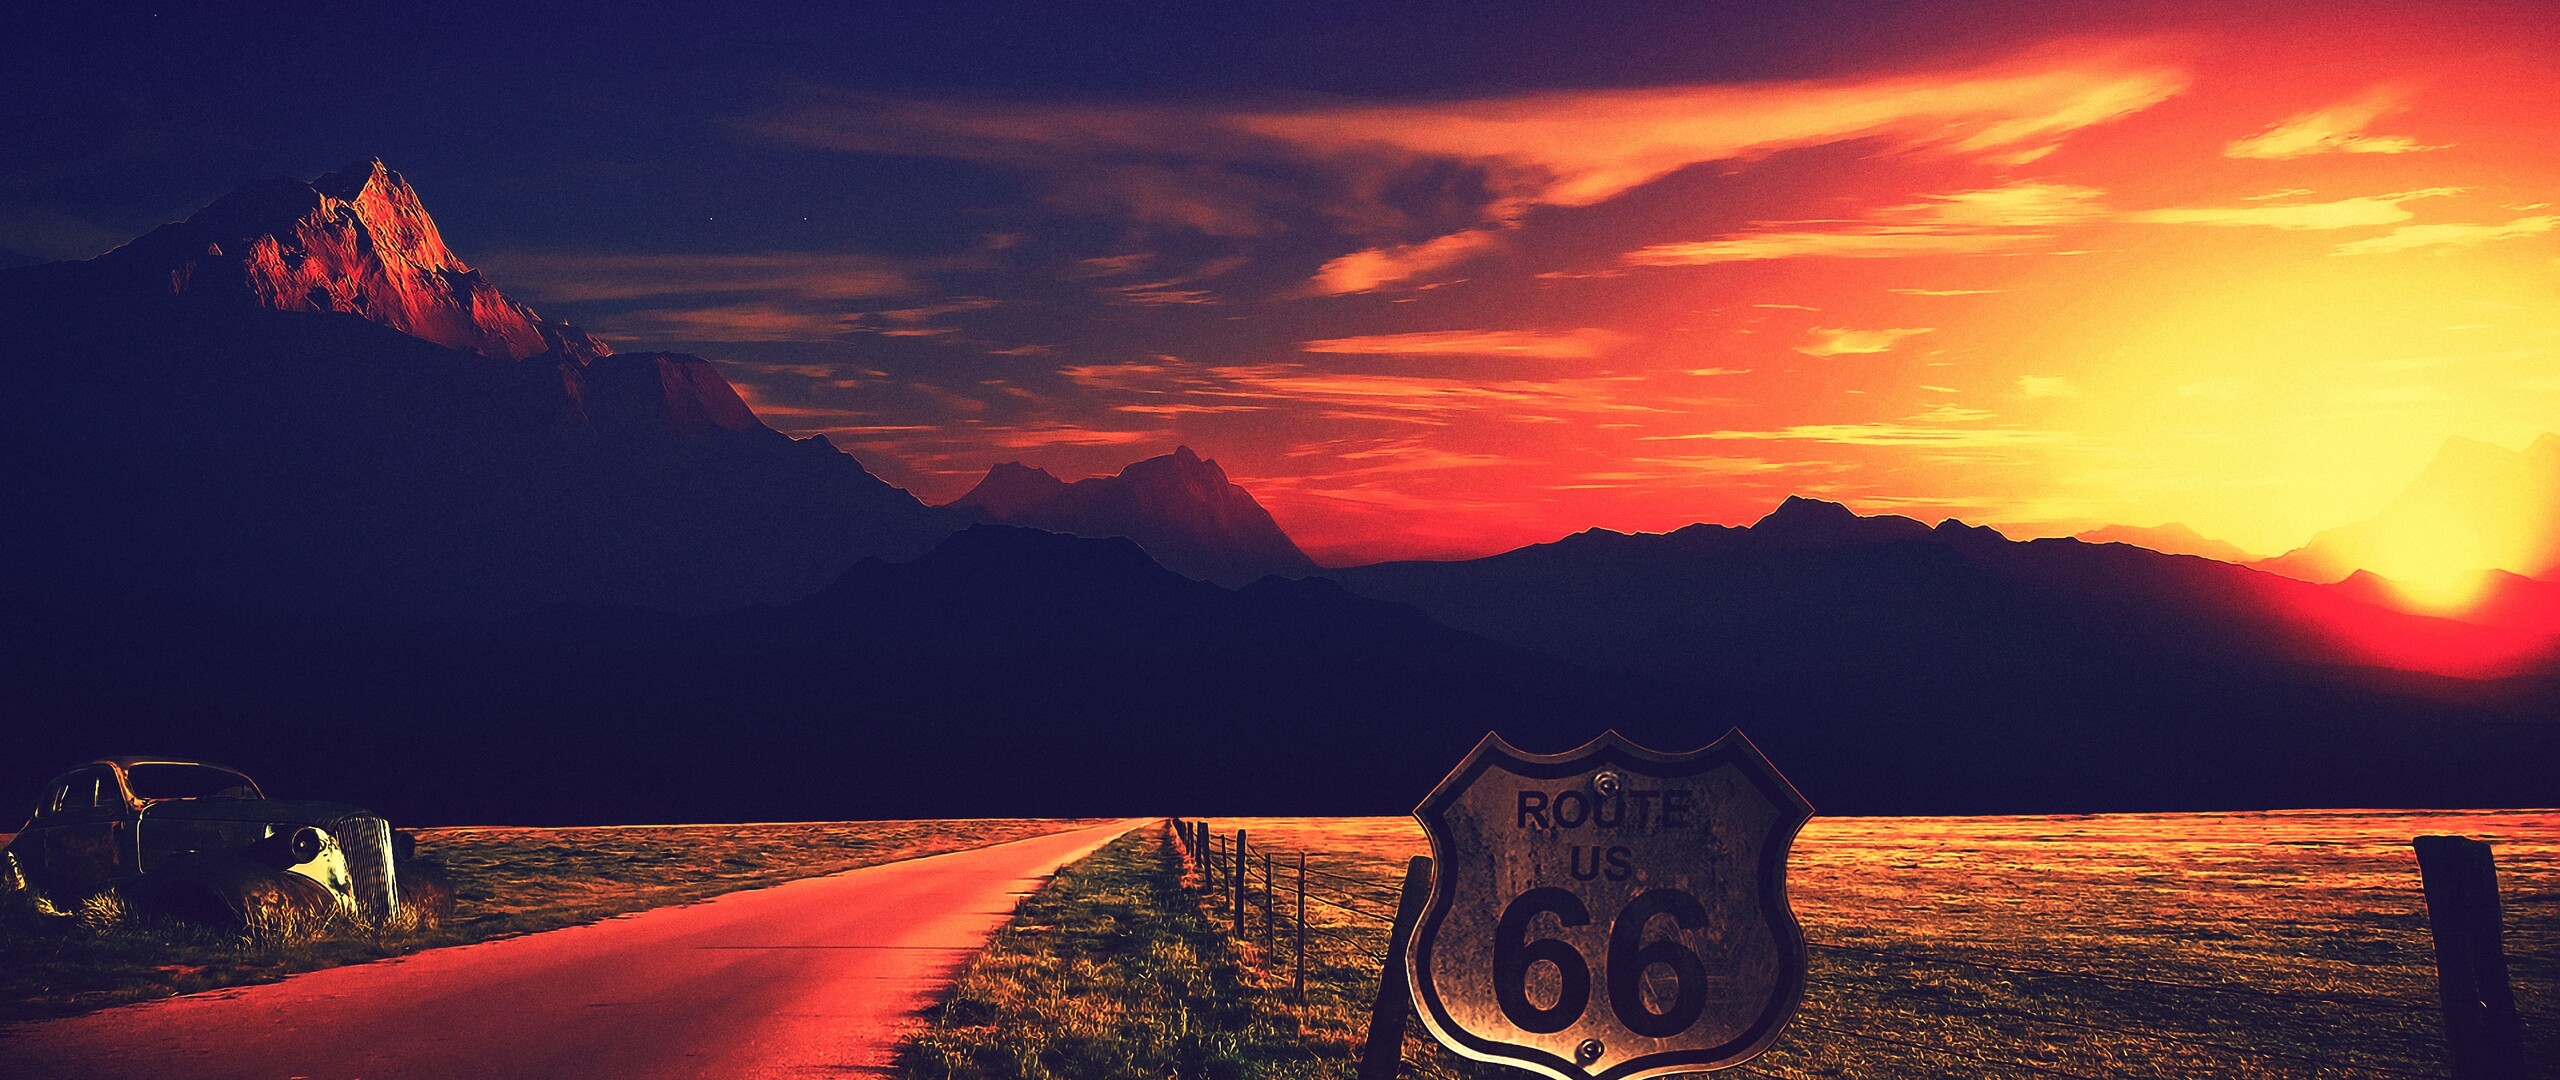 2560x1080 Route Us 66 Photography 4k Wallpaper,2560x1080 Resolution HD ...